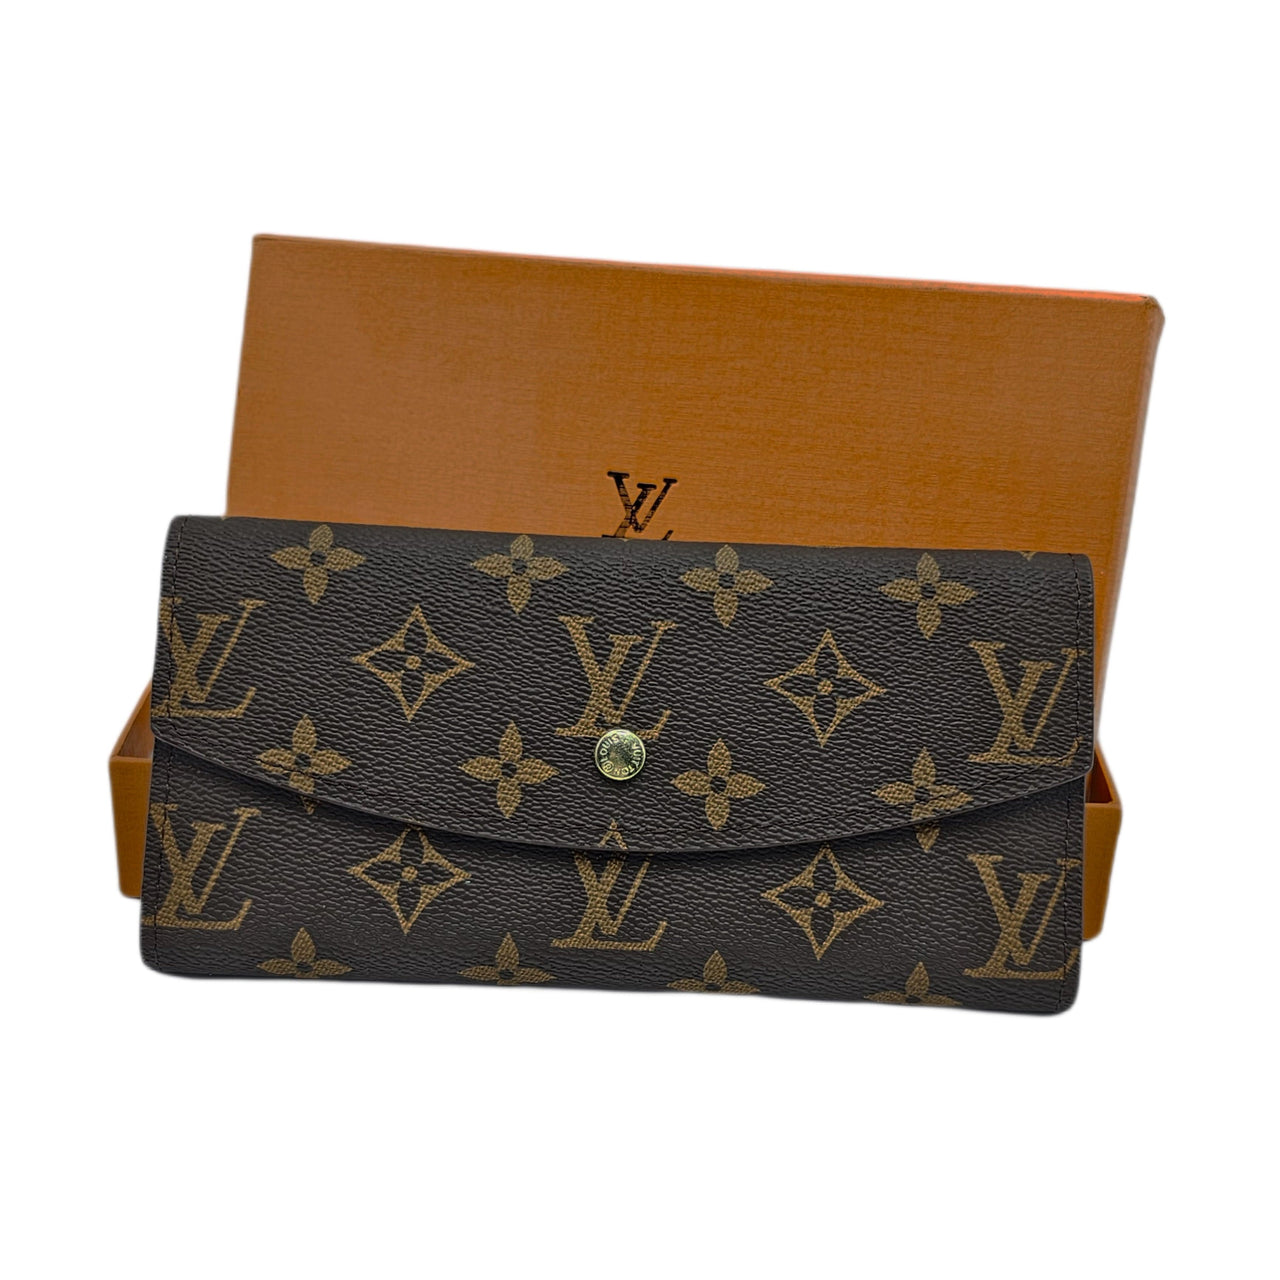 The Bag Couture Luggage & Bags Louis Vuitton 3 Fold Wallet Classic Brown 2